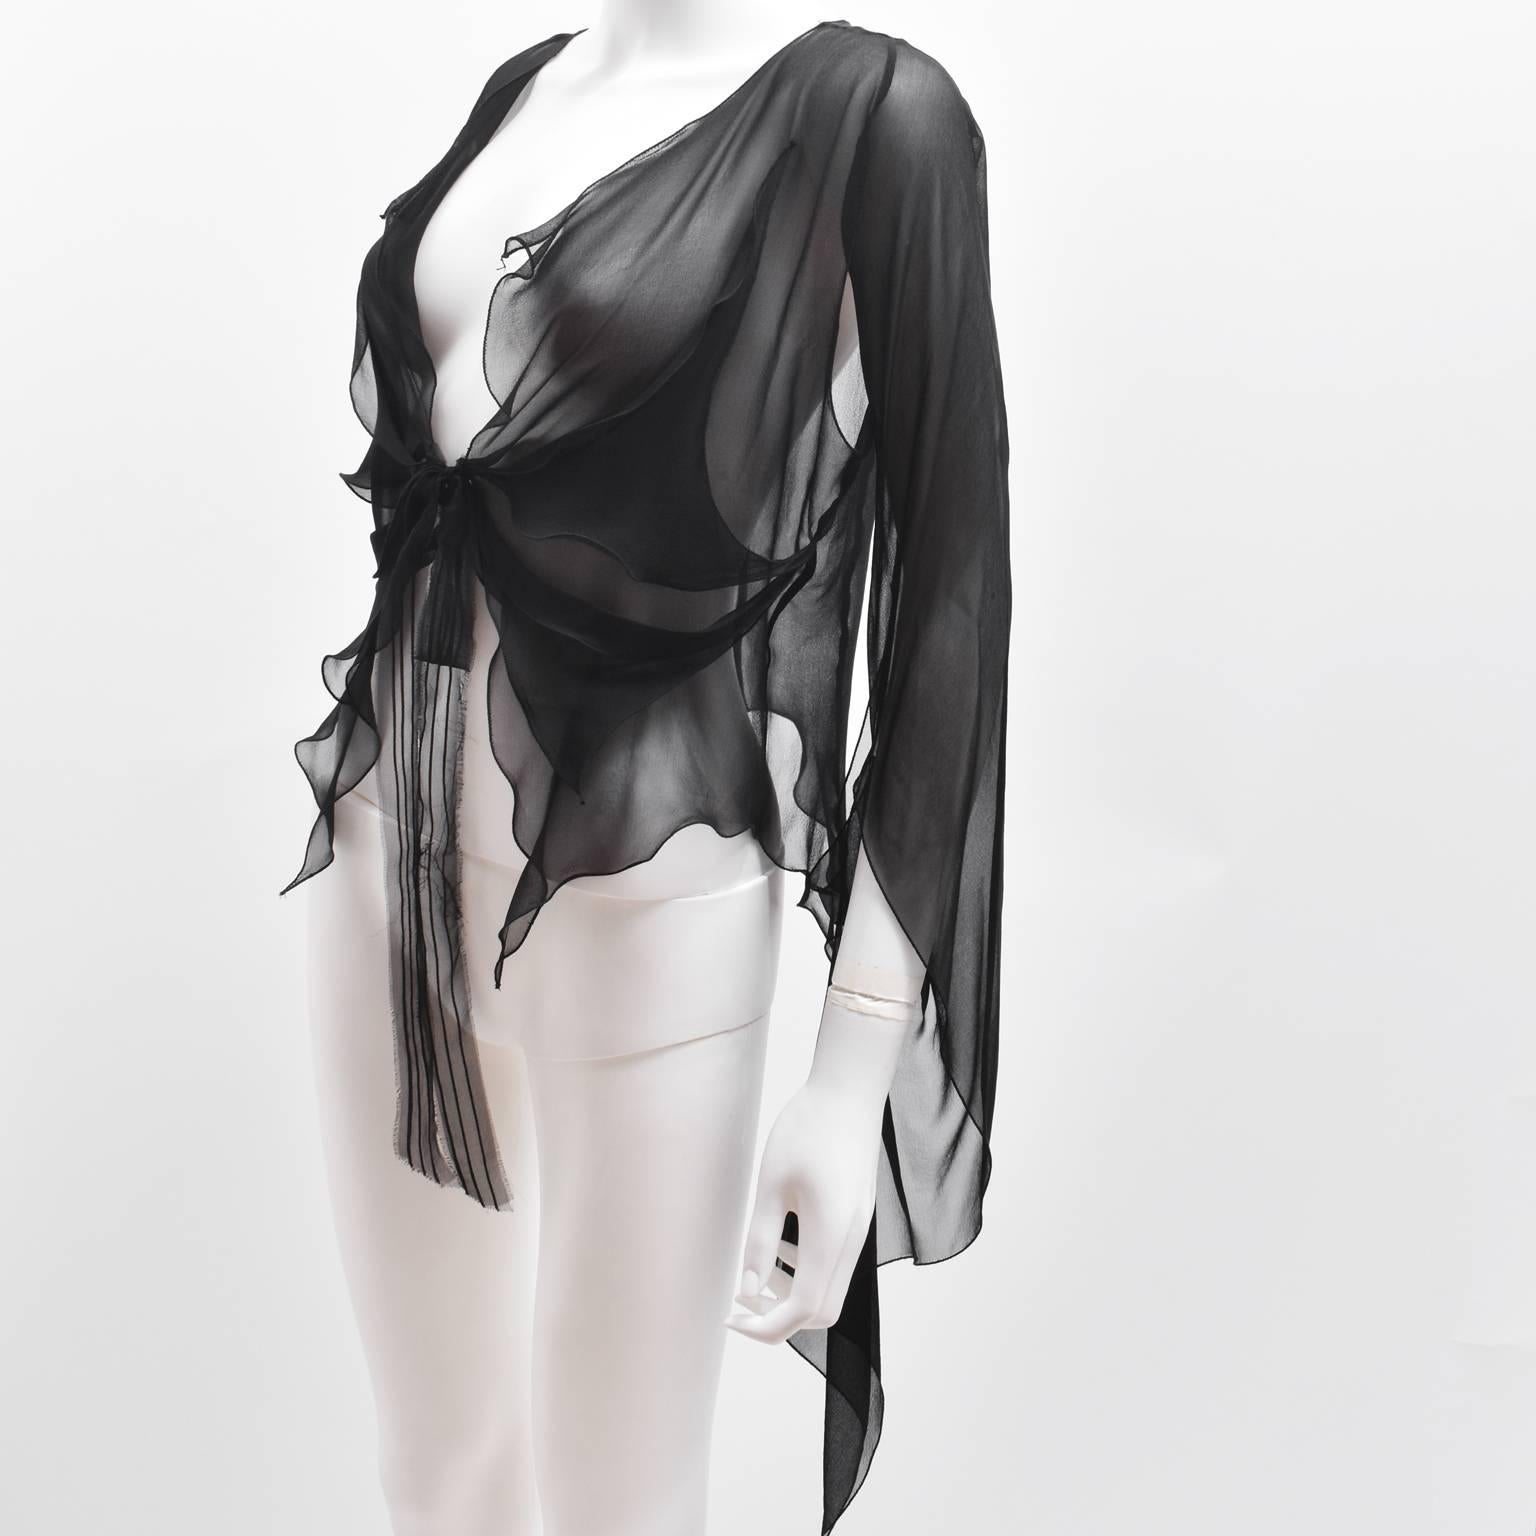 Roland Mouret Black Sheer Silk Tie Blouse with Cut-Out Details c.2010 In Excellent Condition For Sale In London, GB